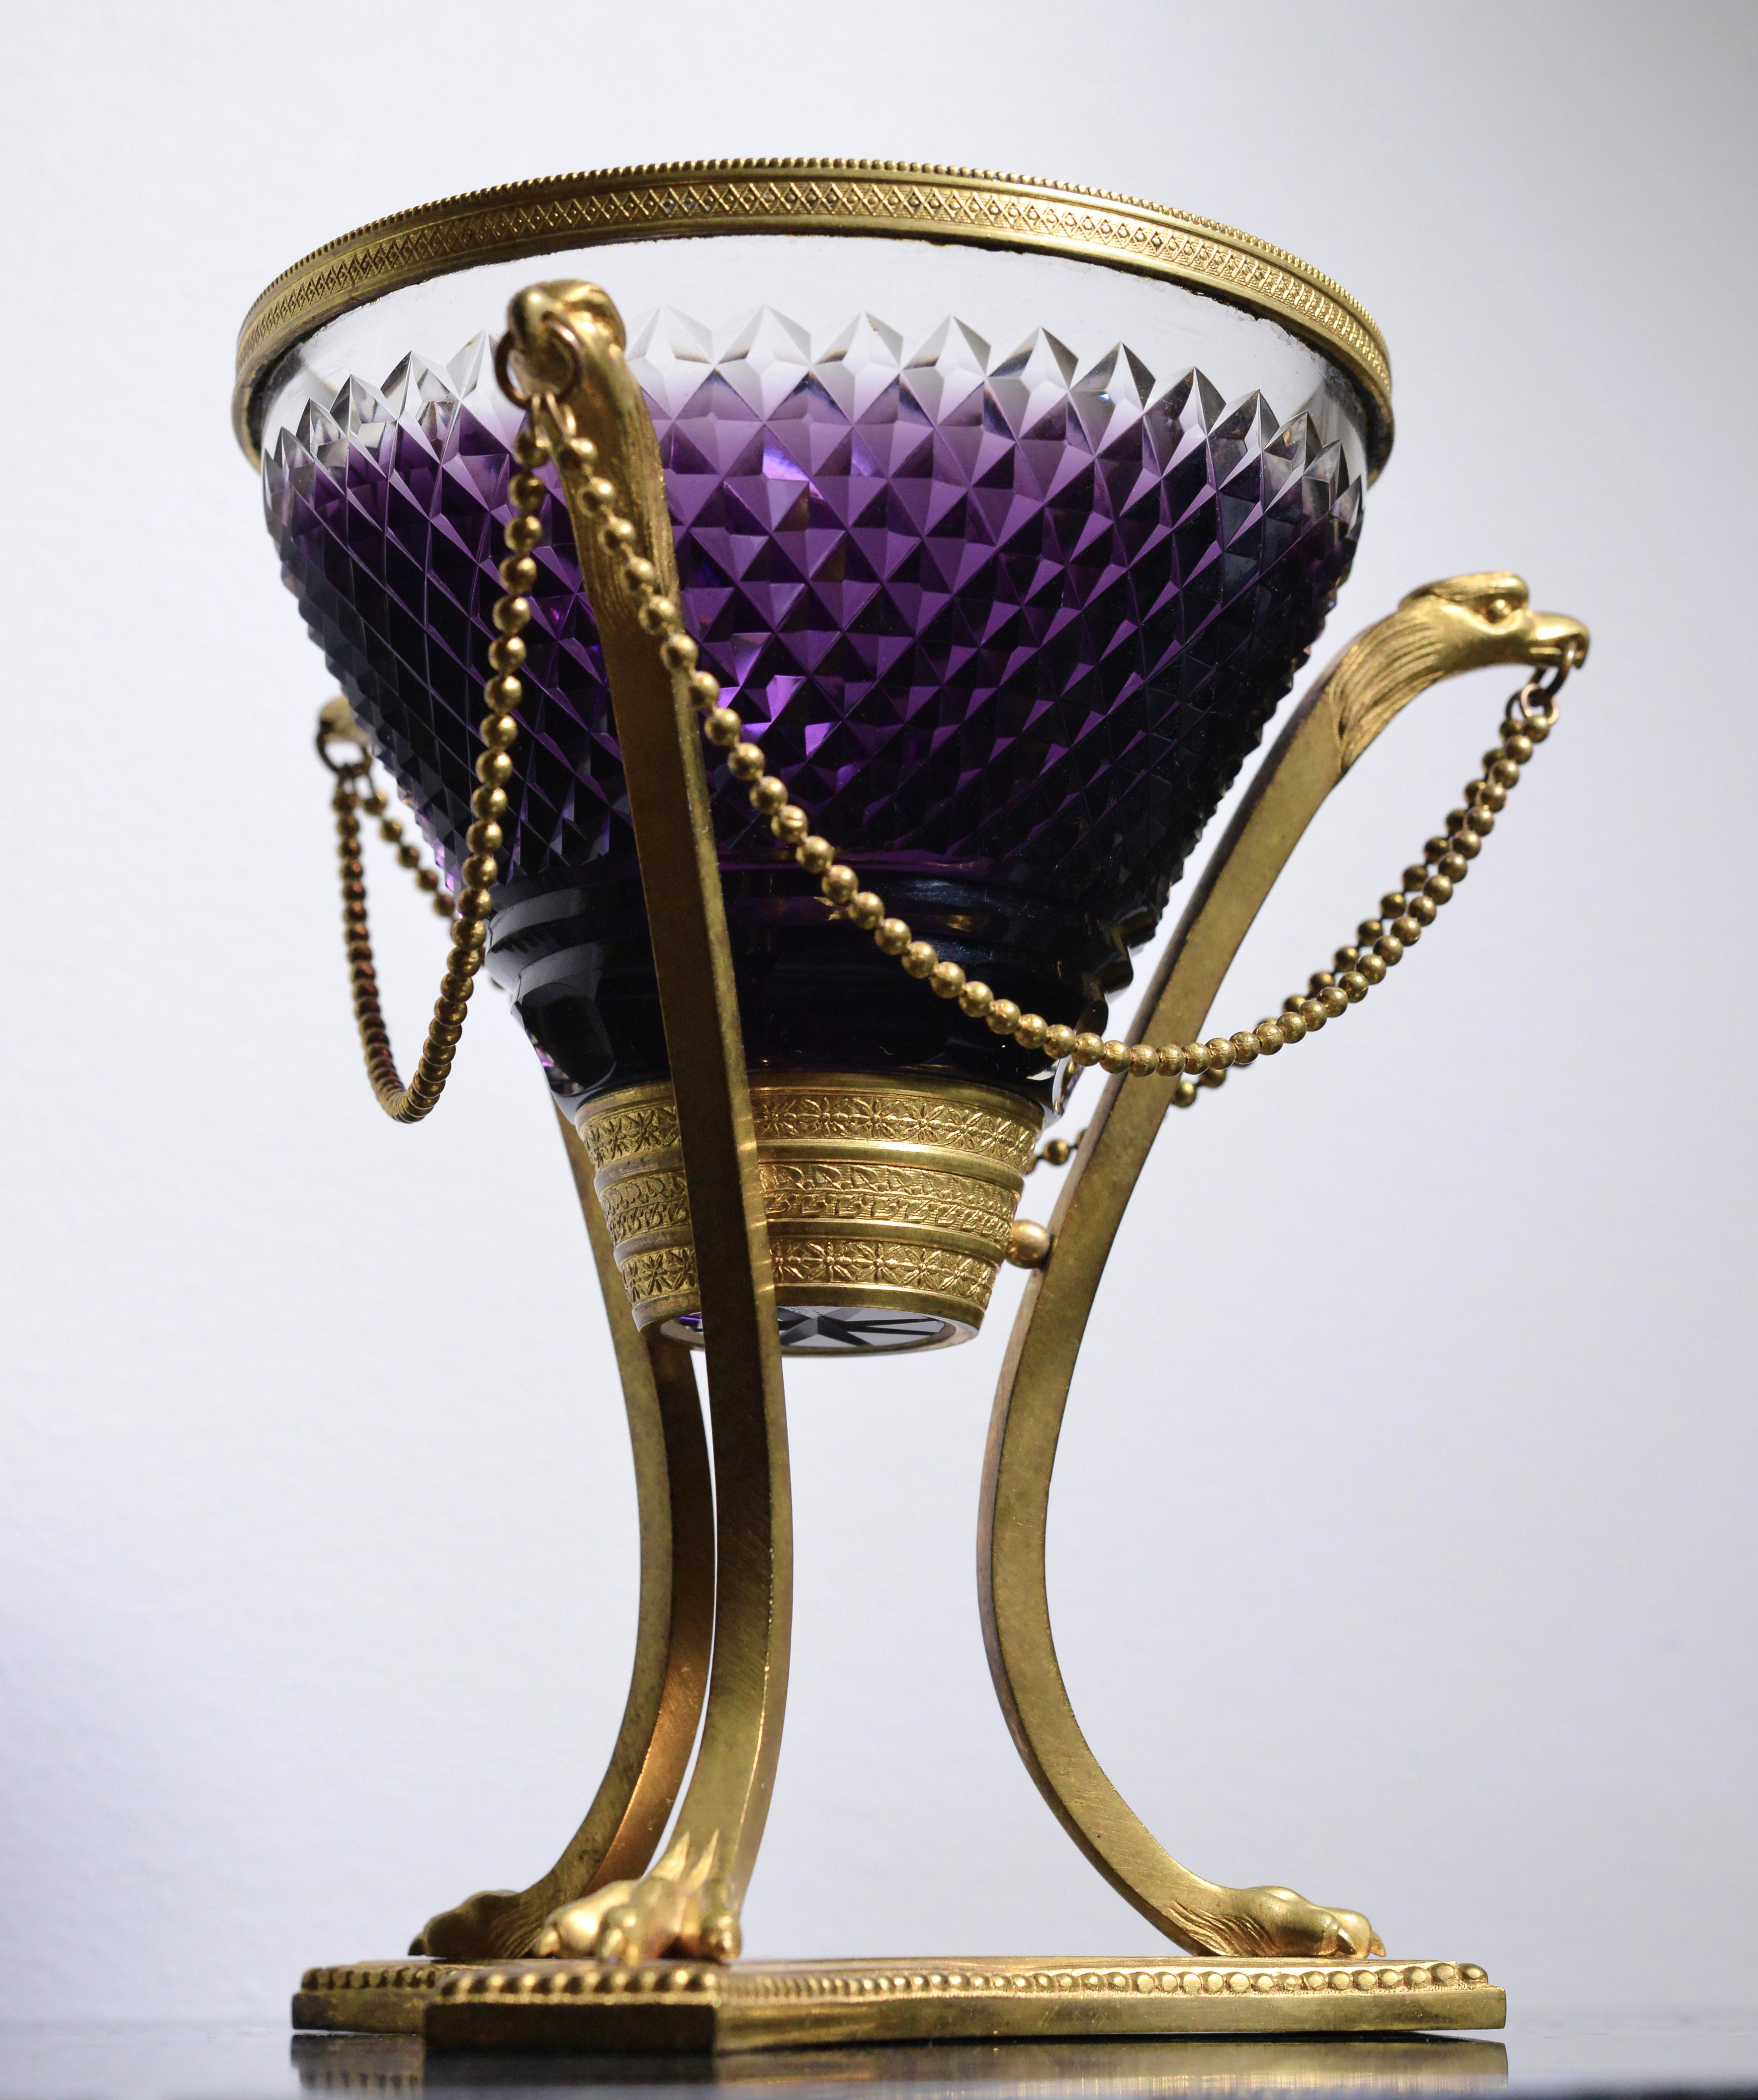 Cut Crystal Amethyst glass Vase w Gilt bronze Griffins and Lion paws Empire In Good Condition For Sale In Sweden, SE